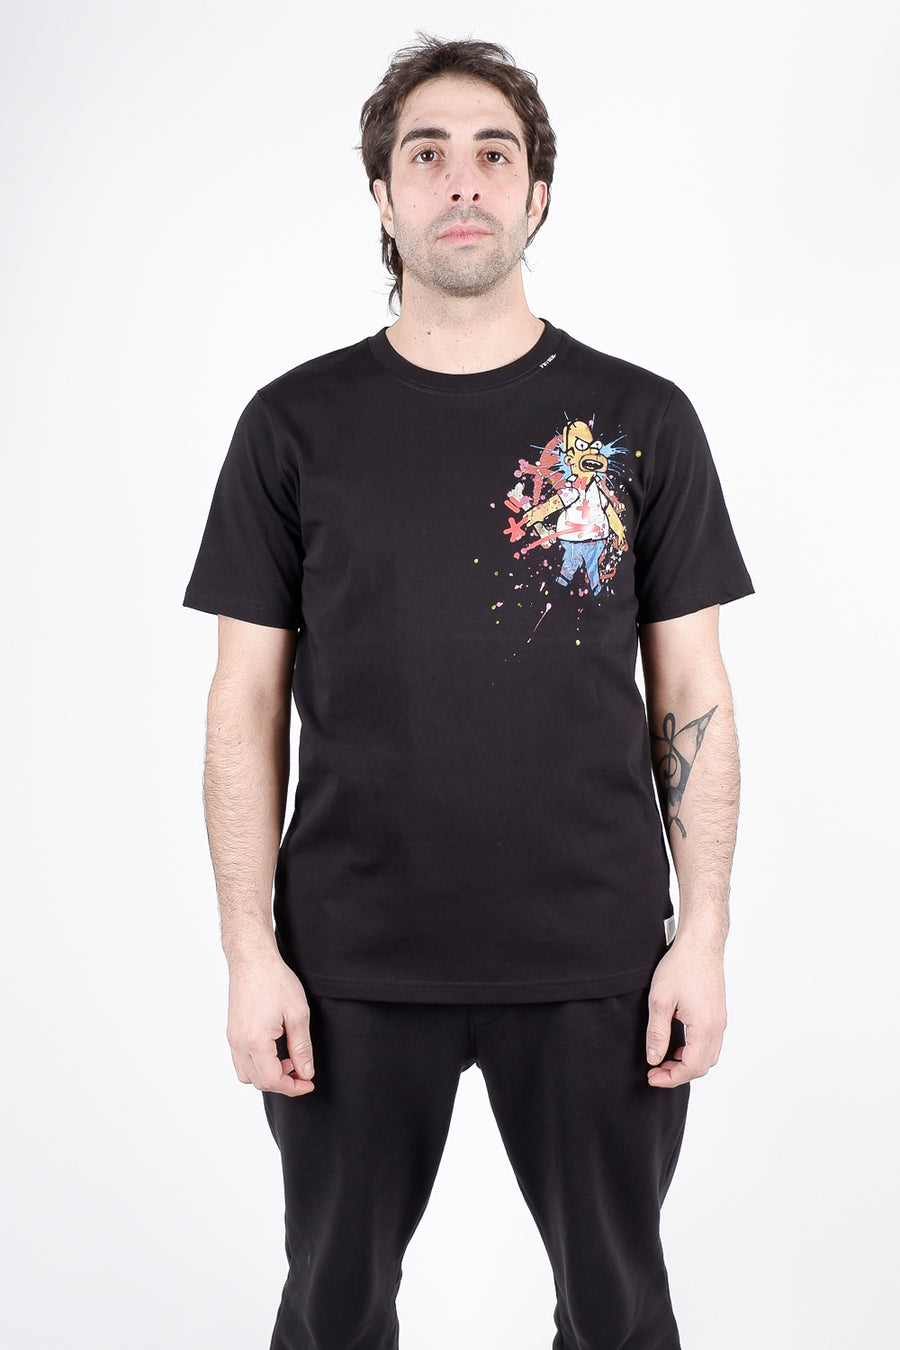 Buy the ABE Homer T-Shirt Black at Intro. Spend £50 for free UK delivery. Official stockists. We ship worldwide.